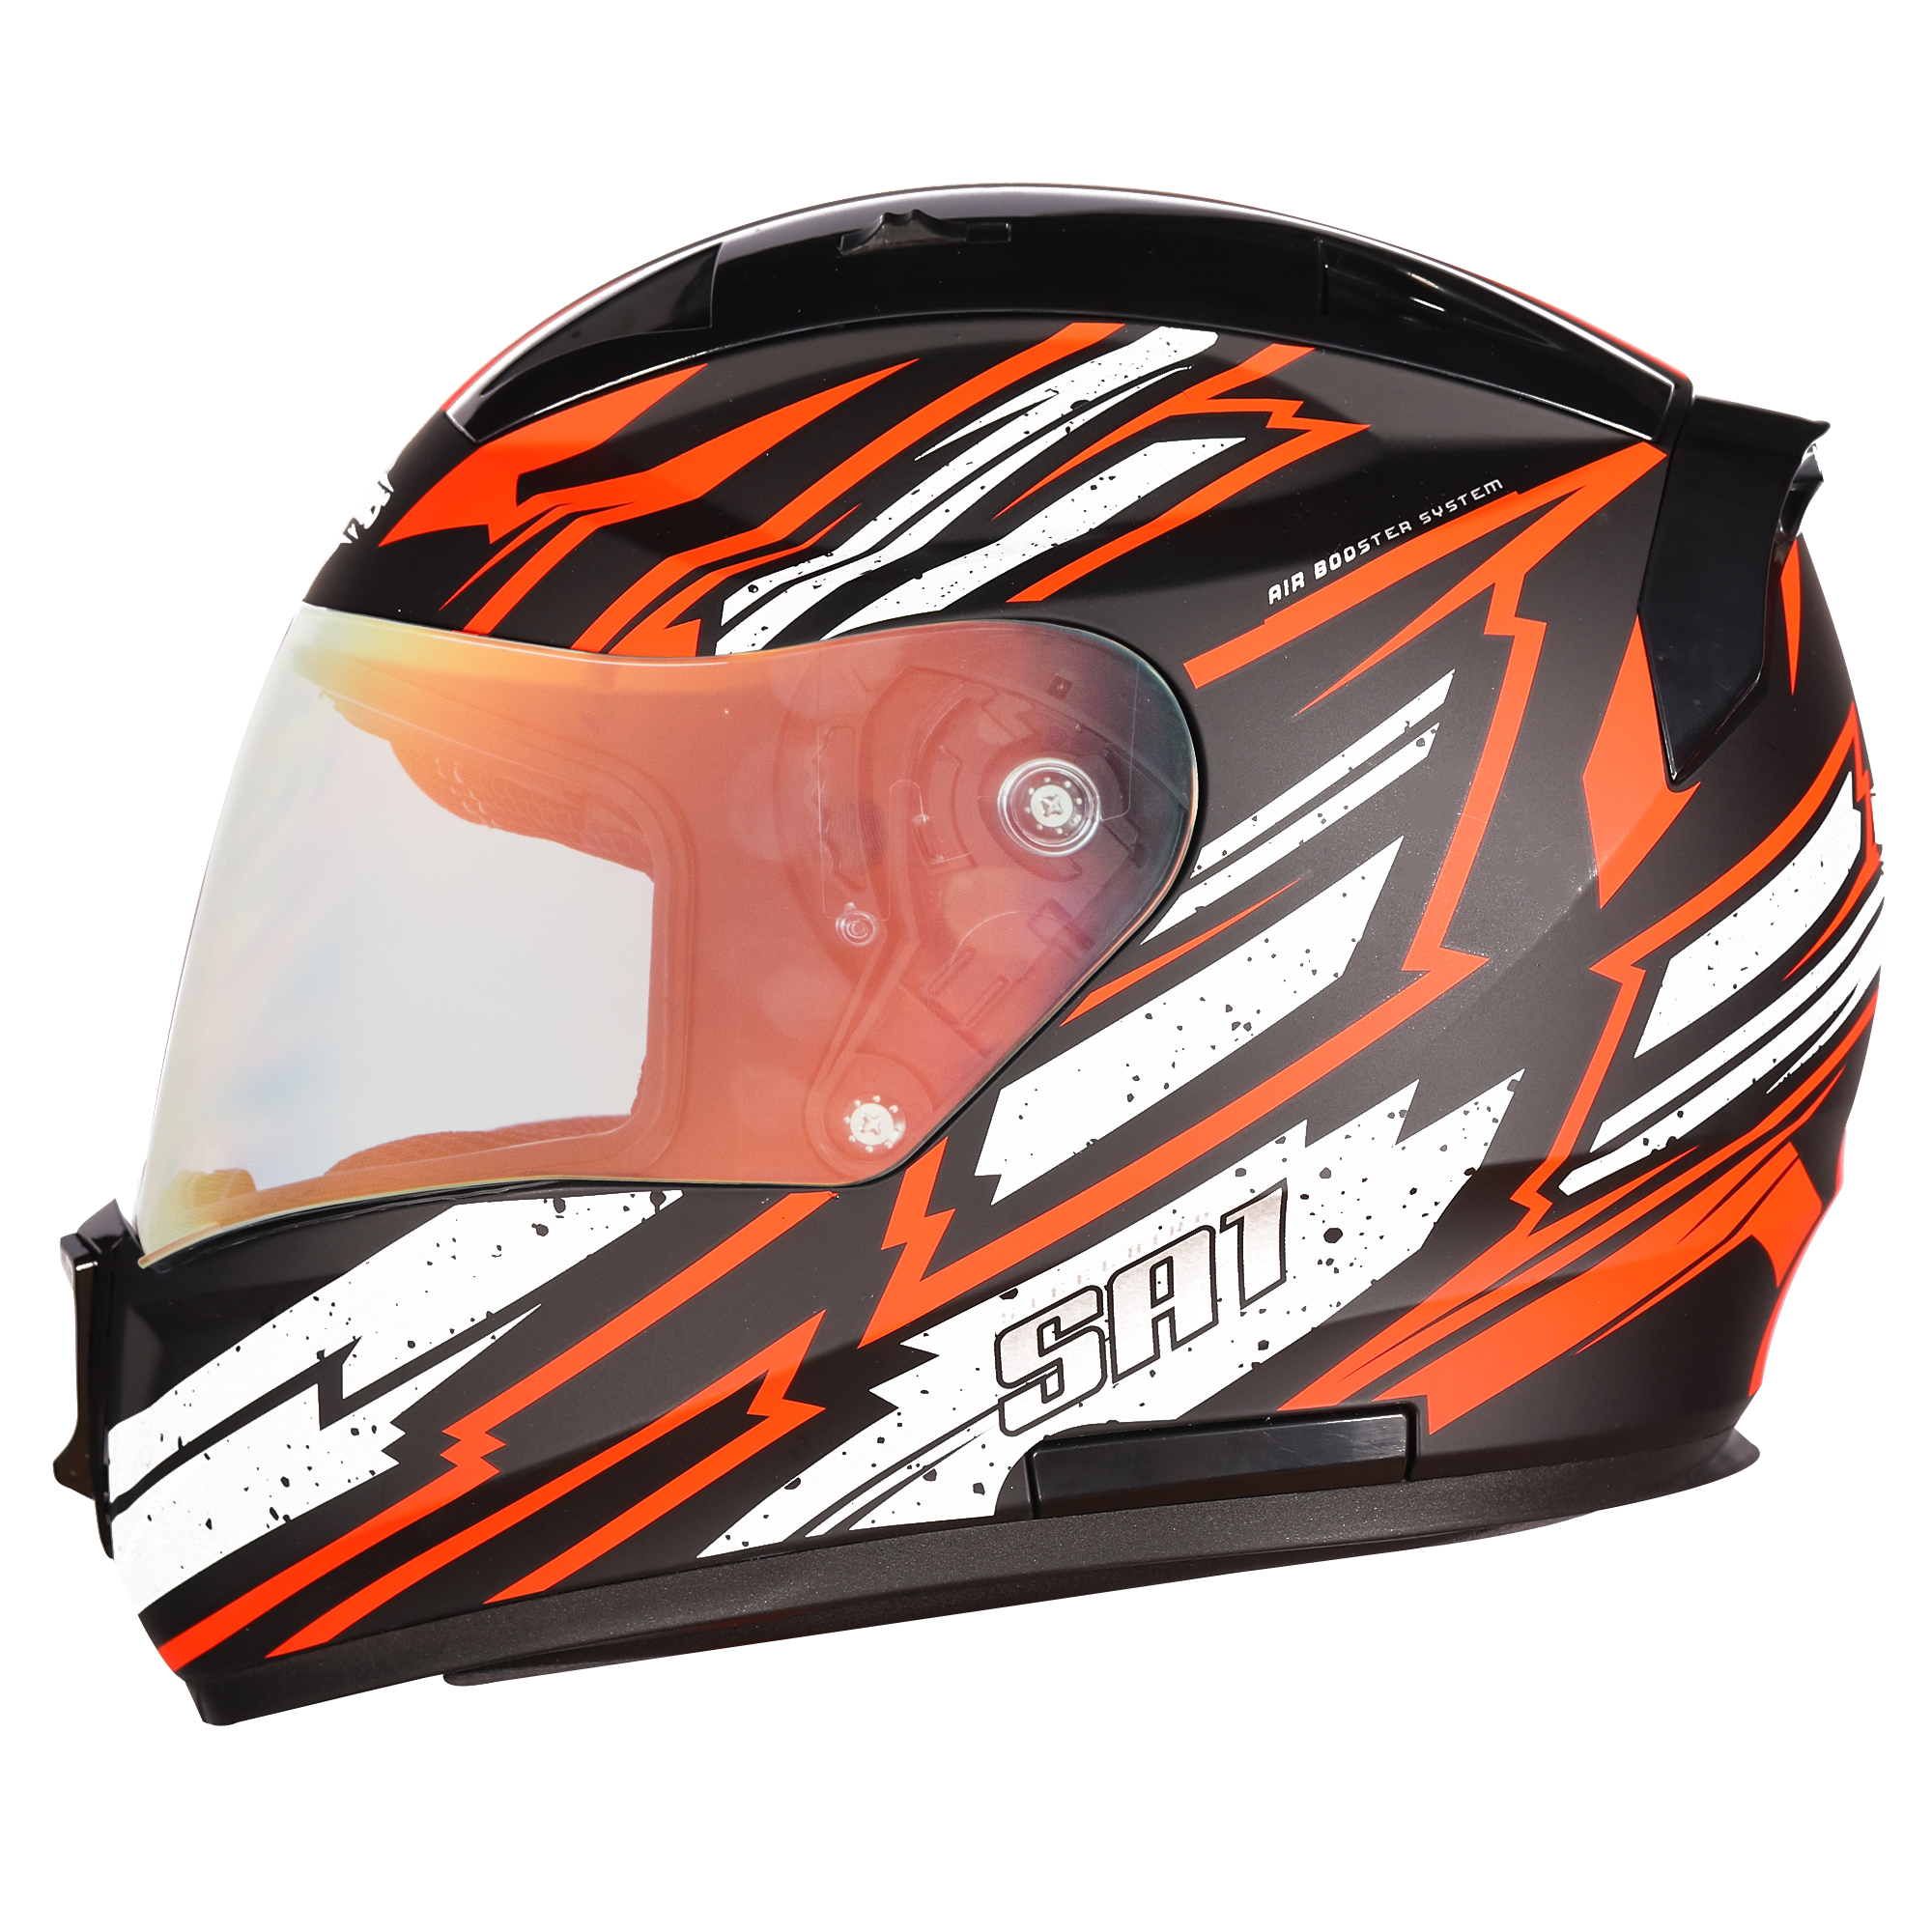 SA-1 BOOSTER MAT BLACK WITH ORANGE - NIGHT VISION GOLD VISOR (WITH EXTRA CLEAR VISOR)